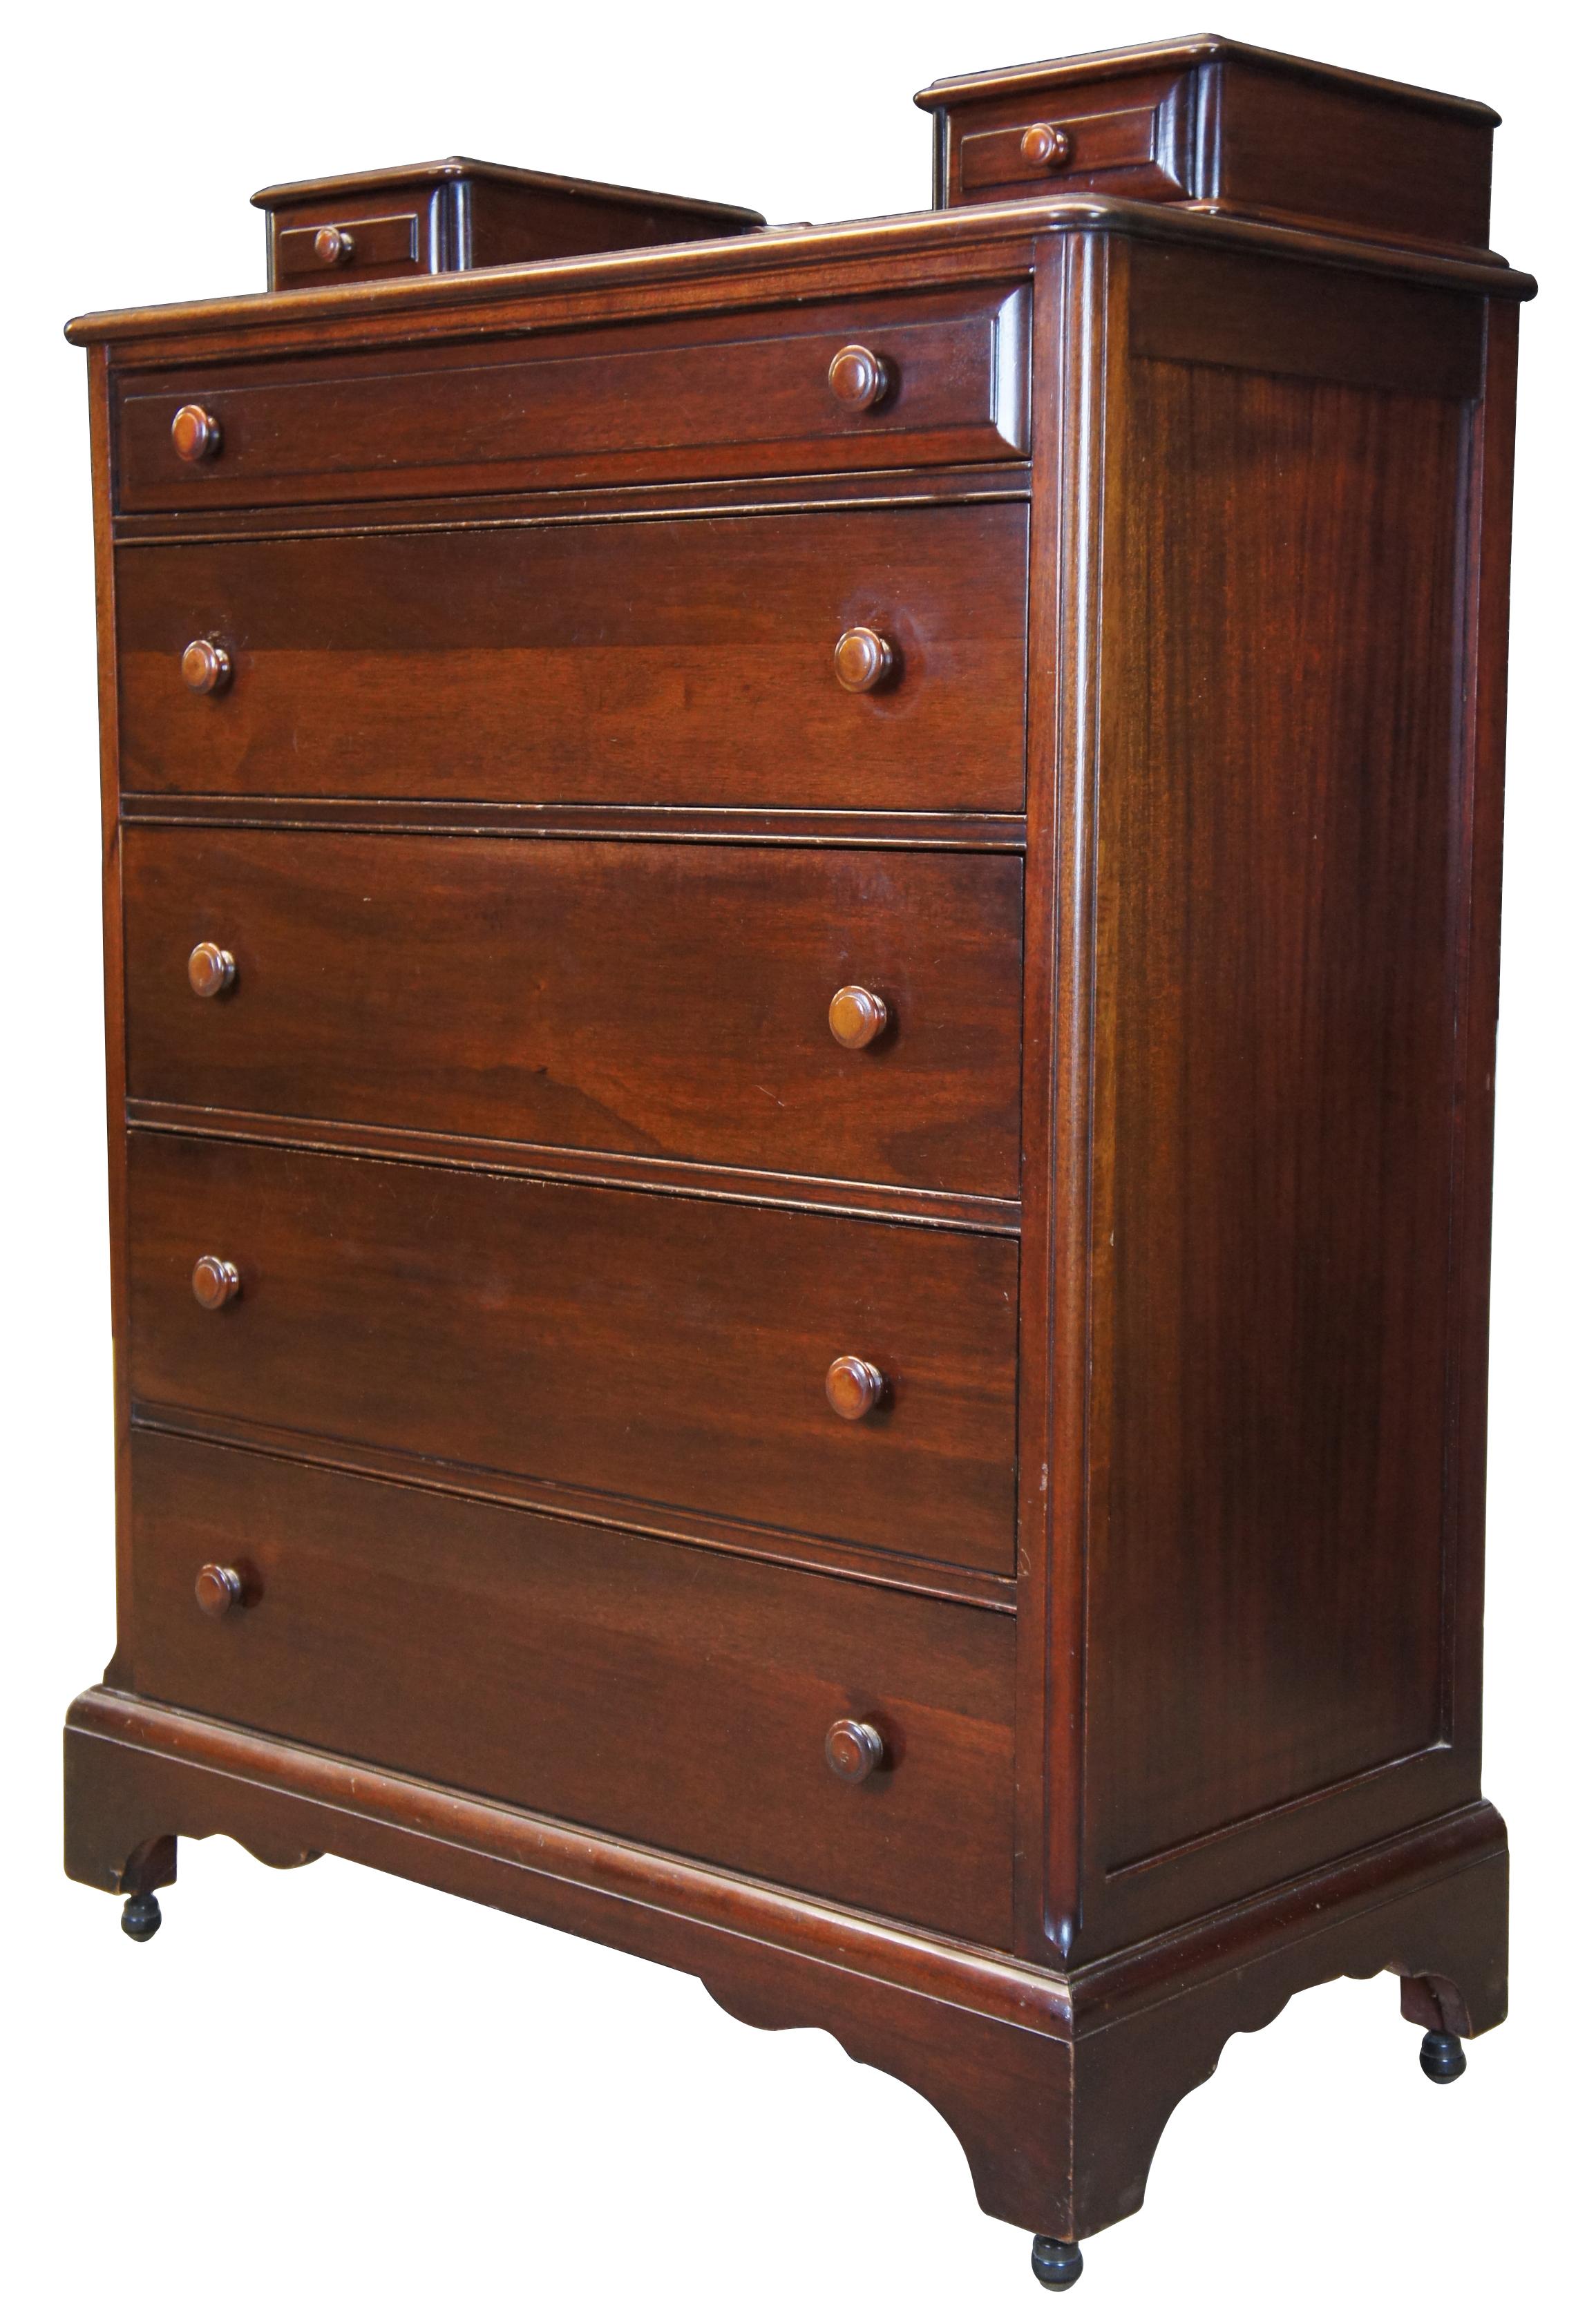 American Classical Antique Early American Mahogany Tallboy Country Dresser Chest of Drawers